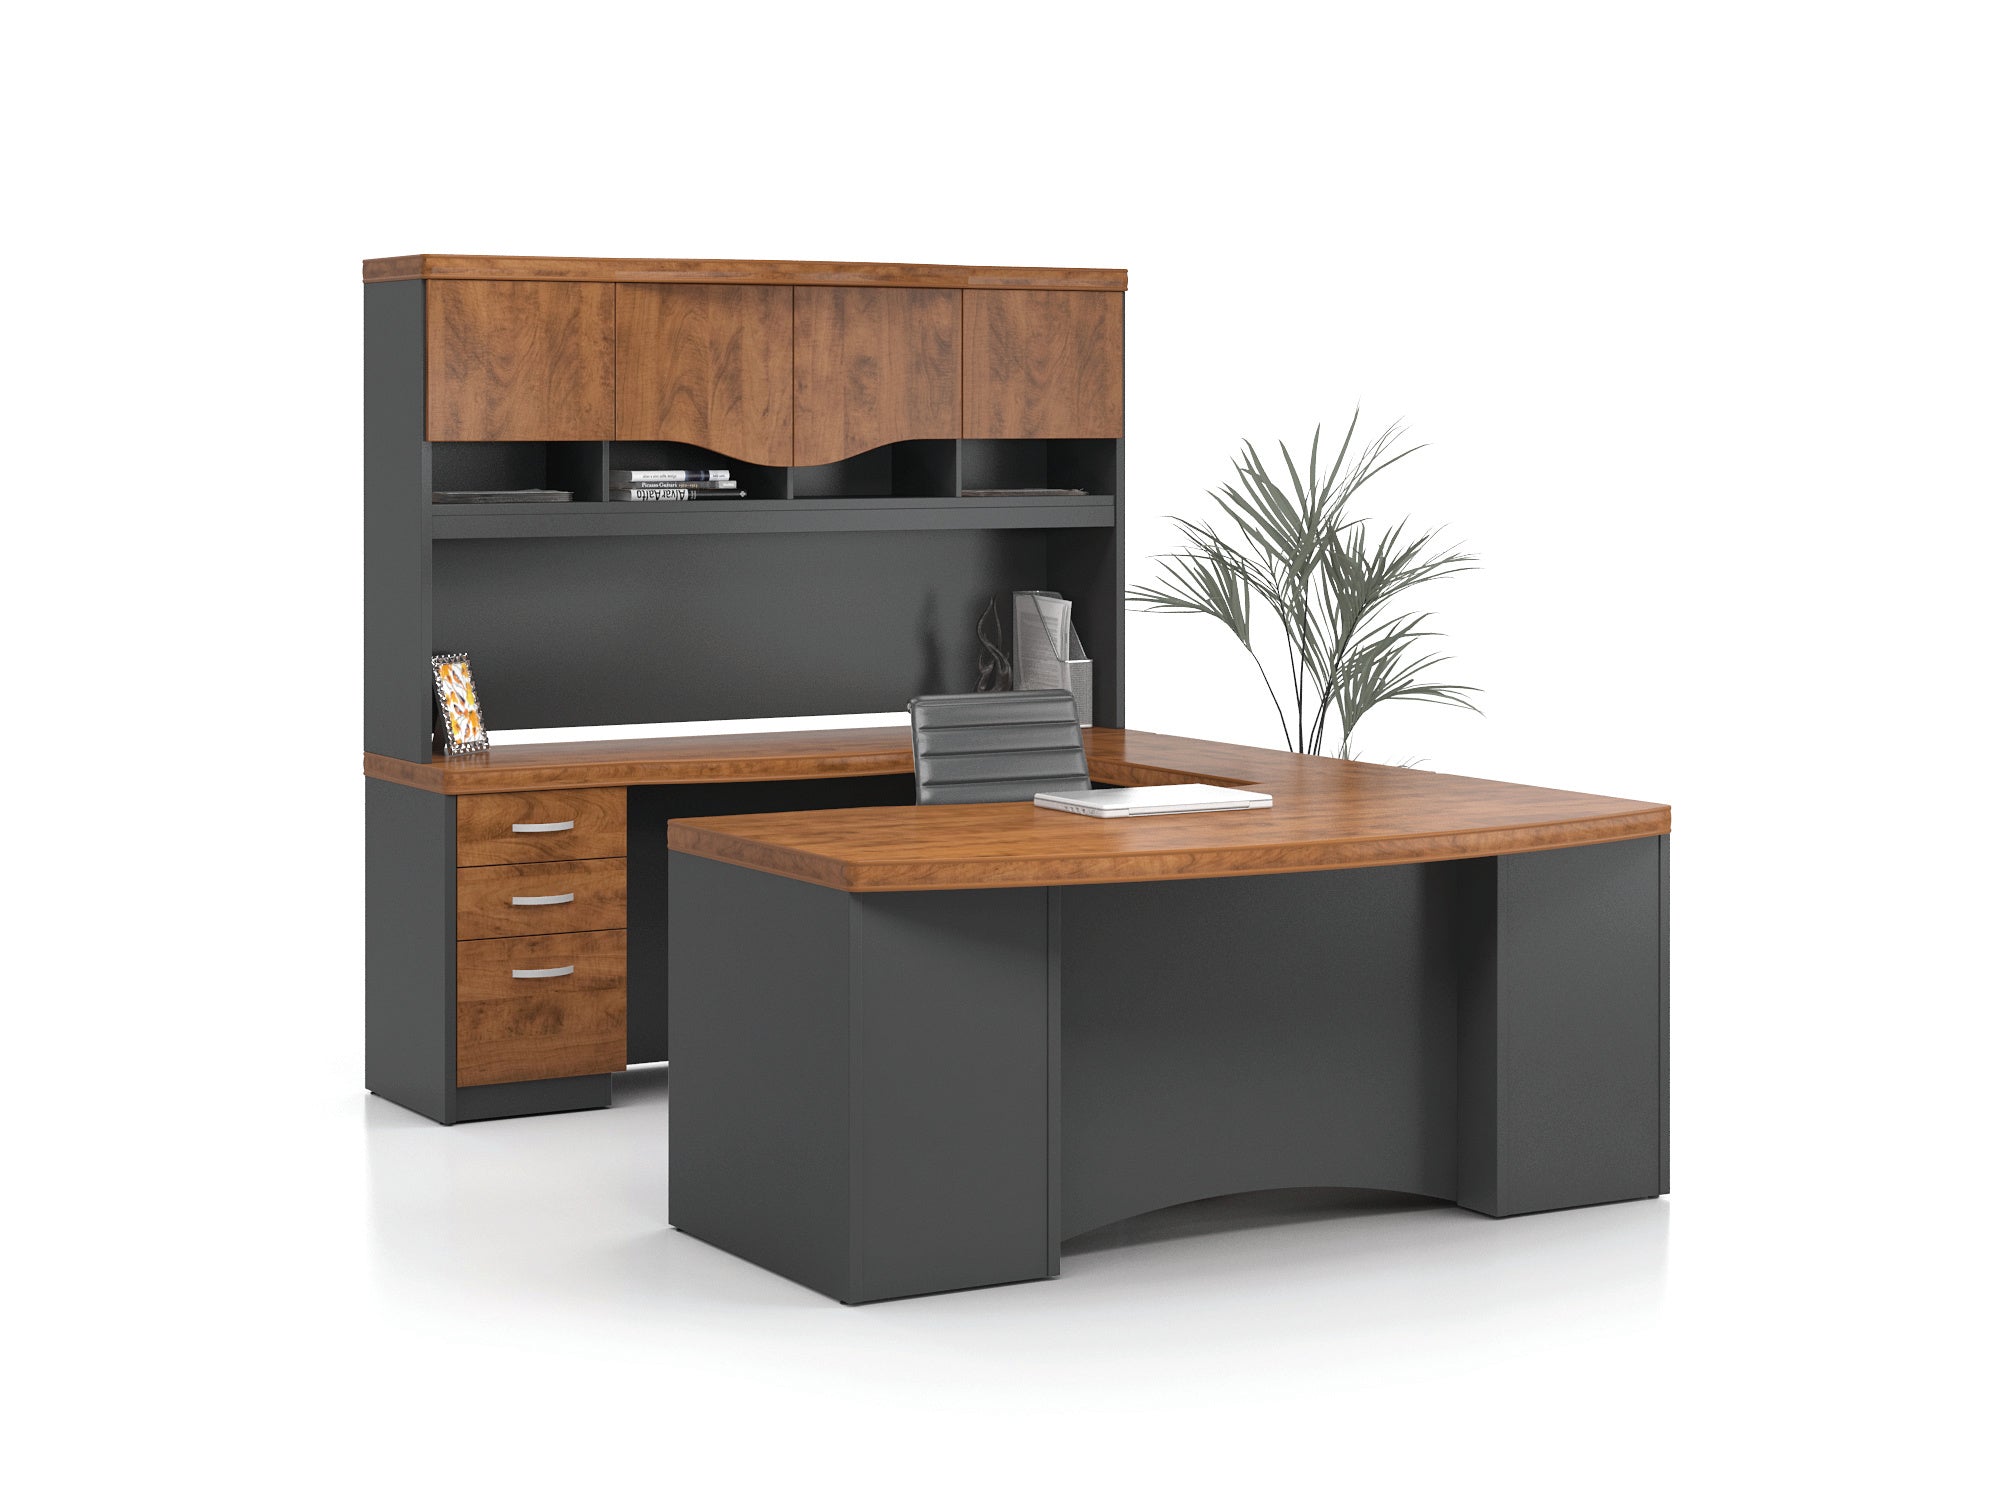 CAM268 - Deluxe Manhattan Series U Shaped Desk / Executive Office Furniture by Candex